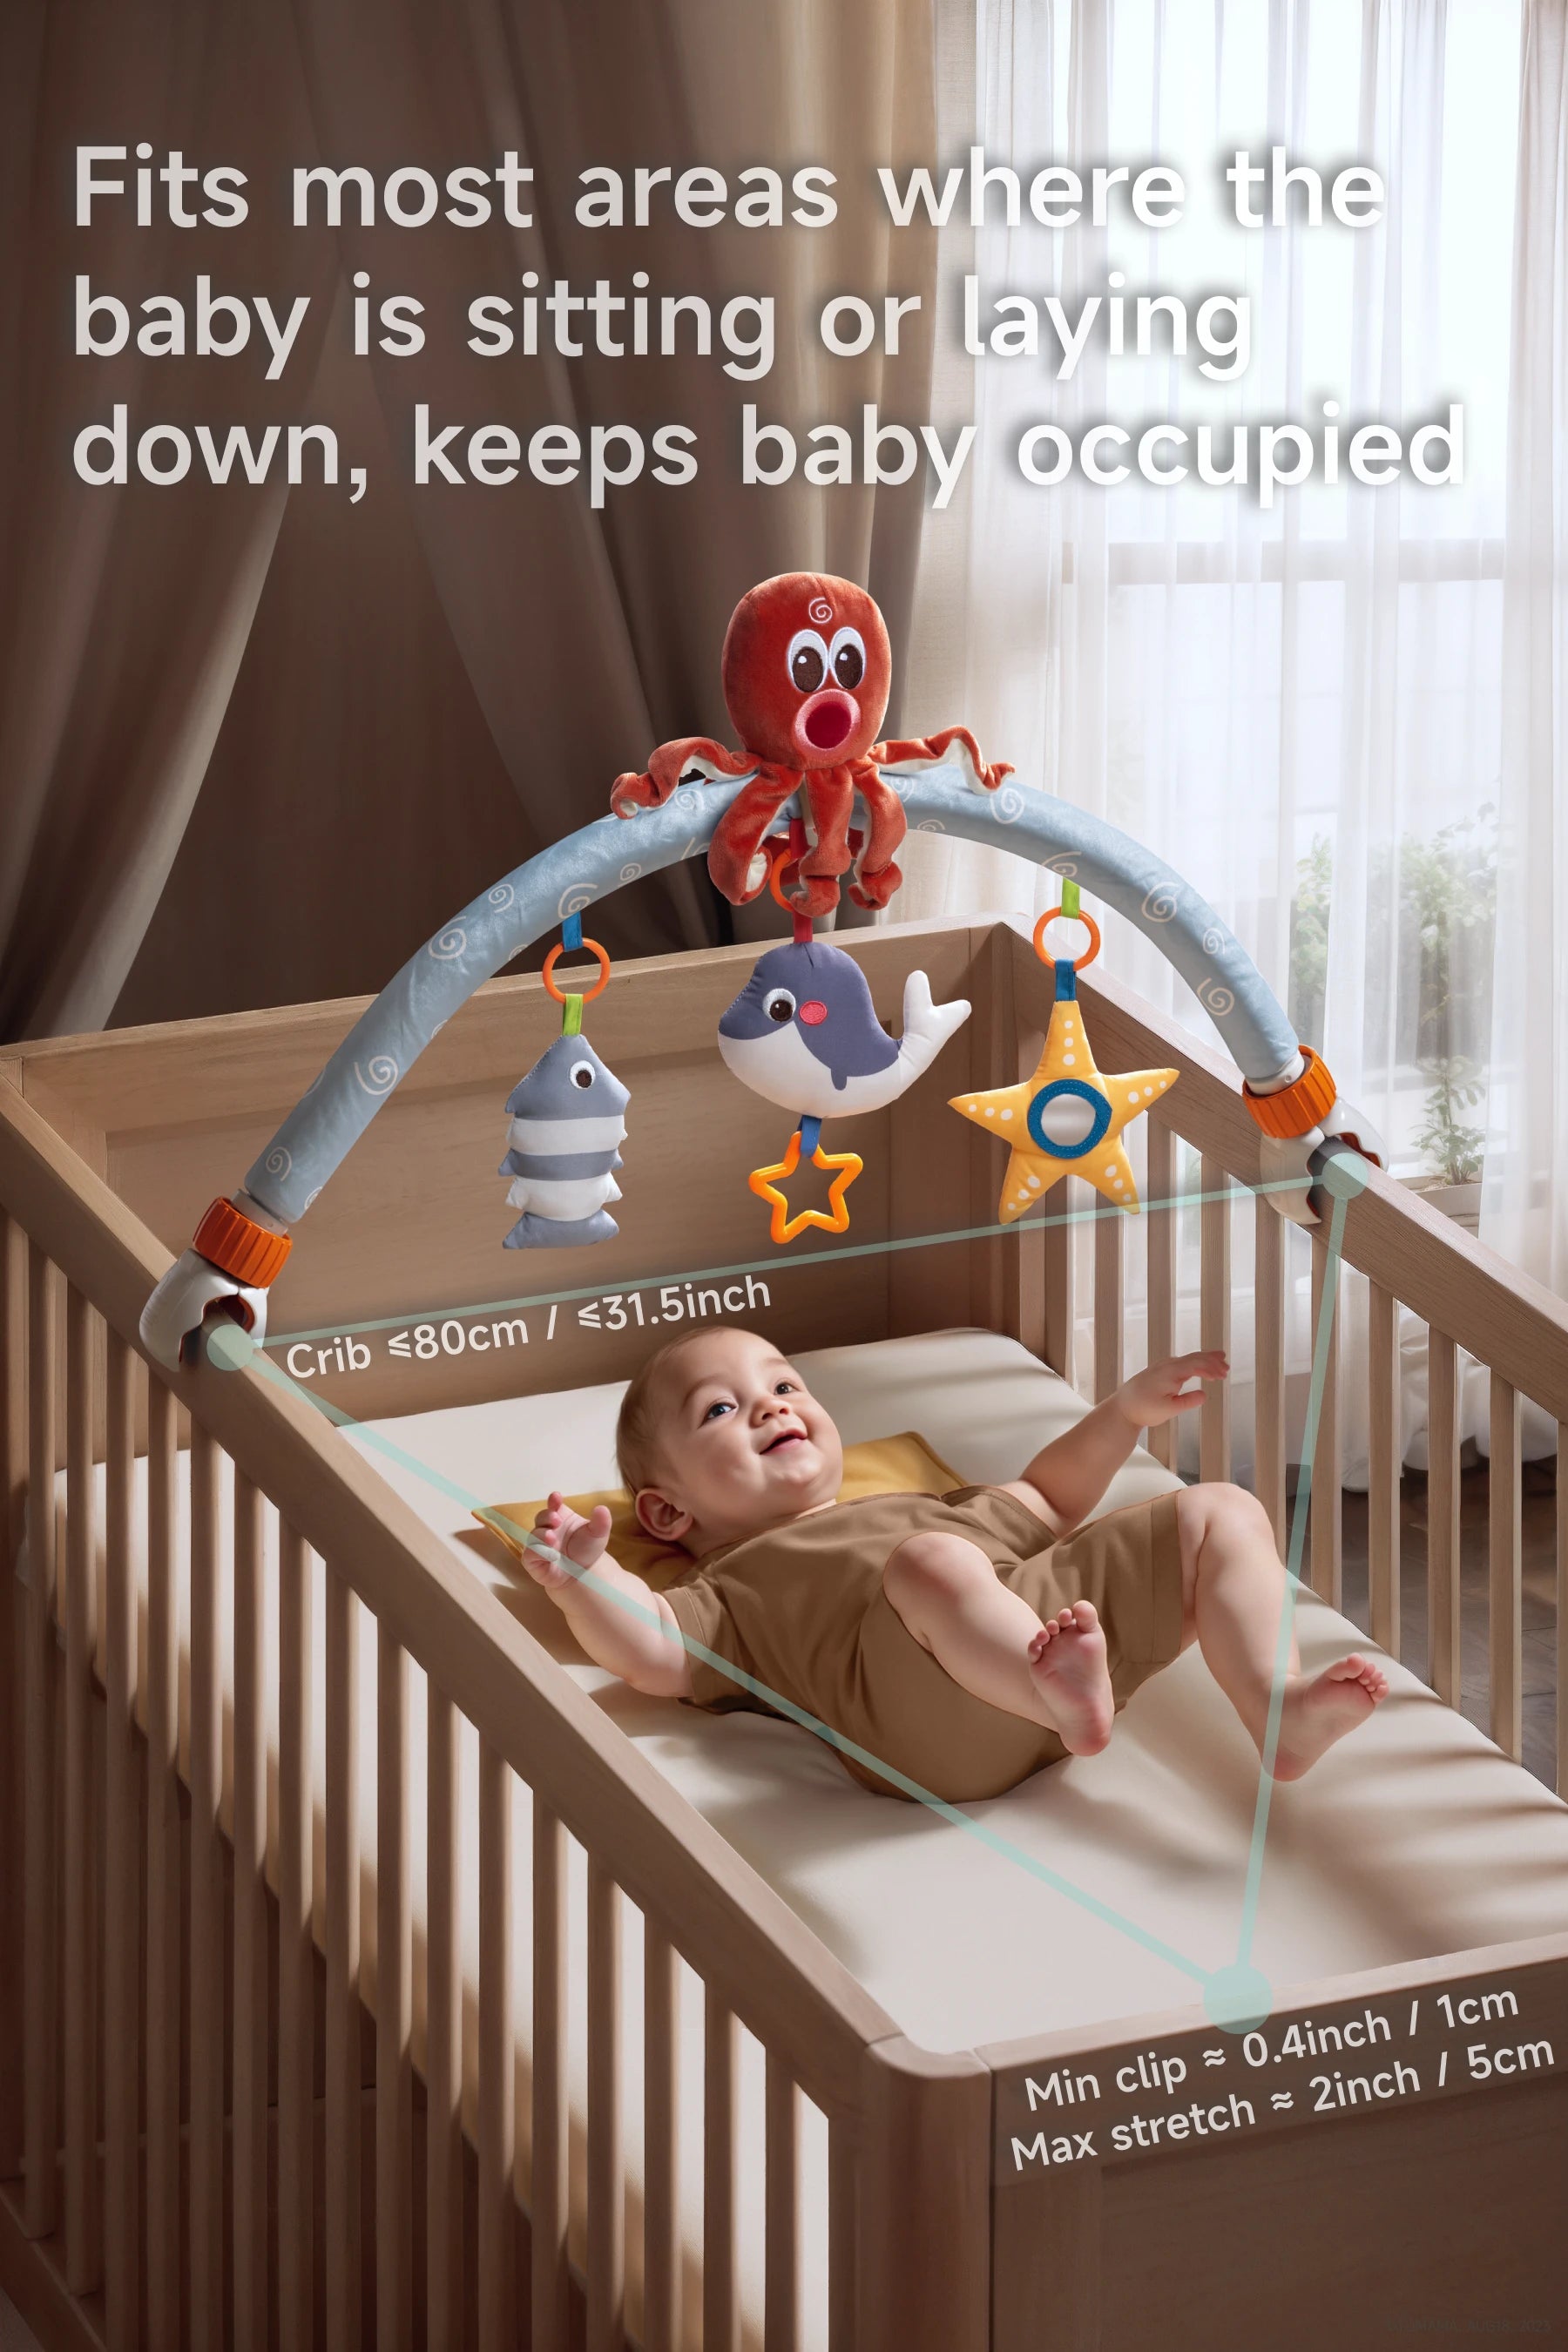 Car seat stroller crib toy with baby arch for infants